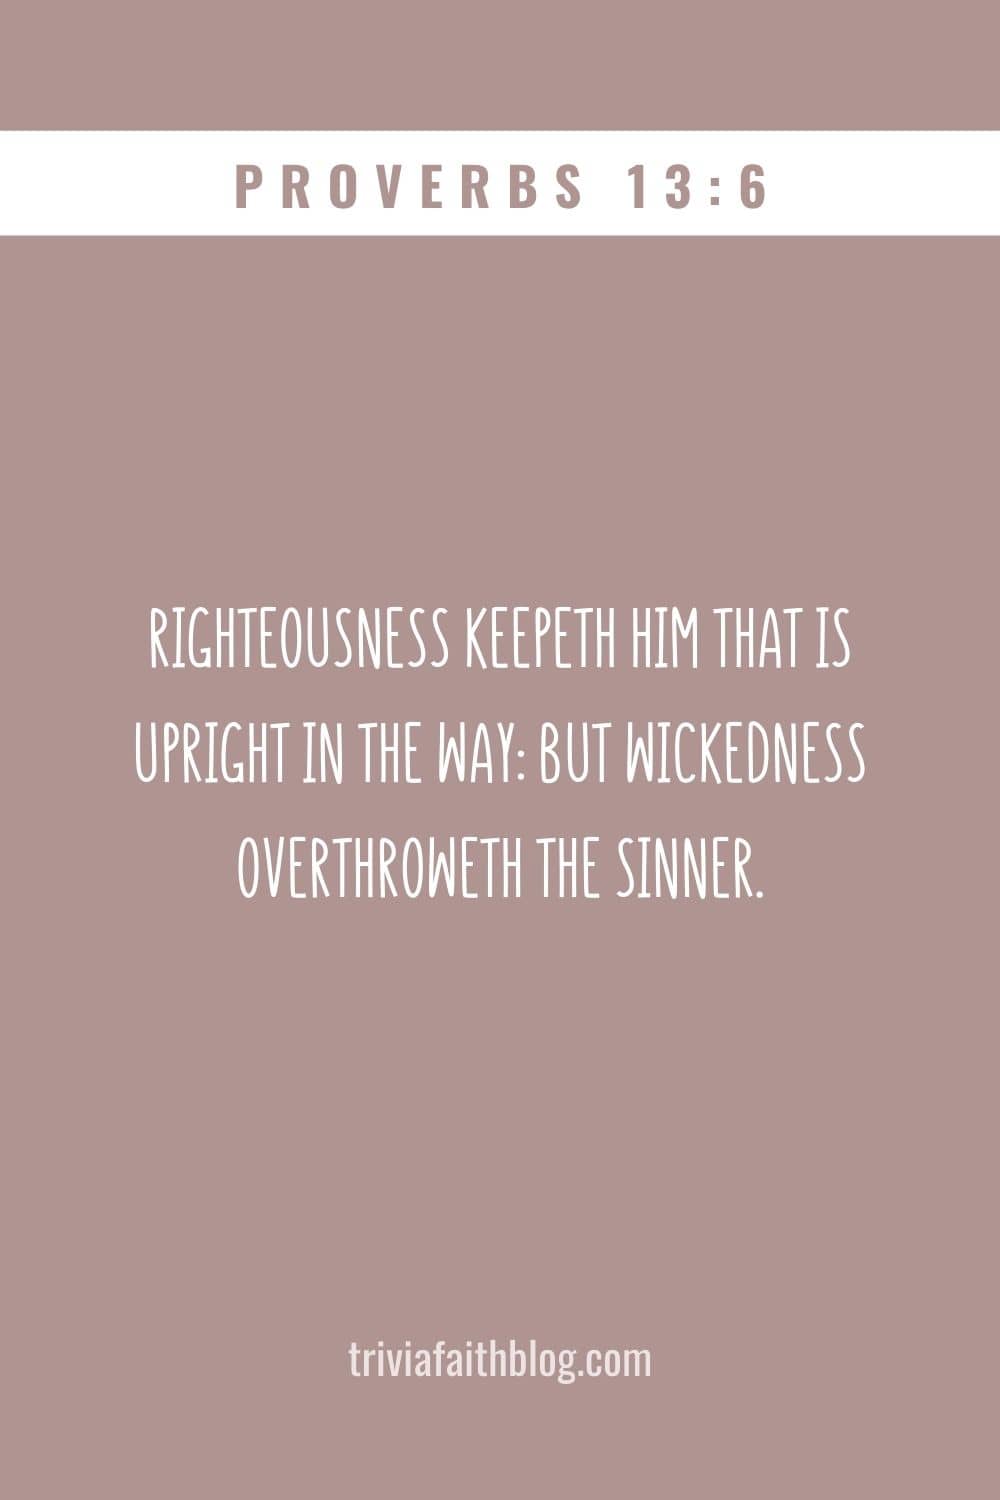 Righteousness keepeth him that is upright in the way but wickedness overthroweth the sinner